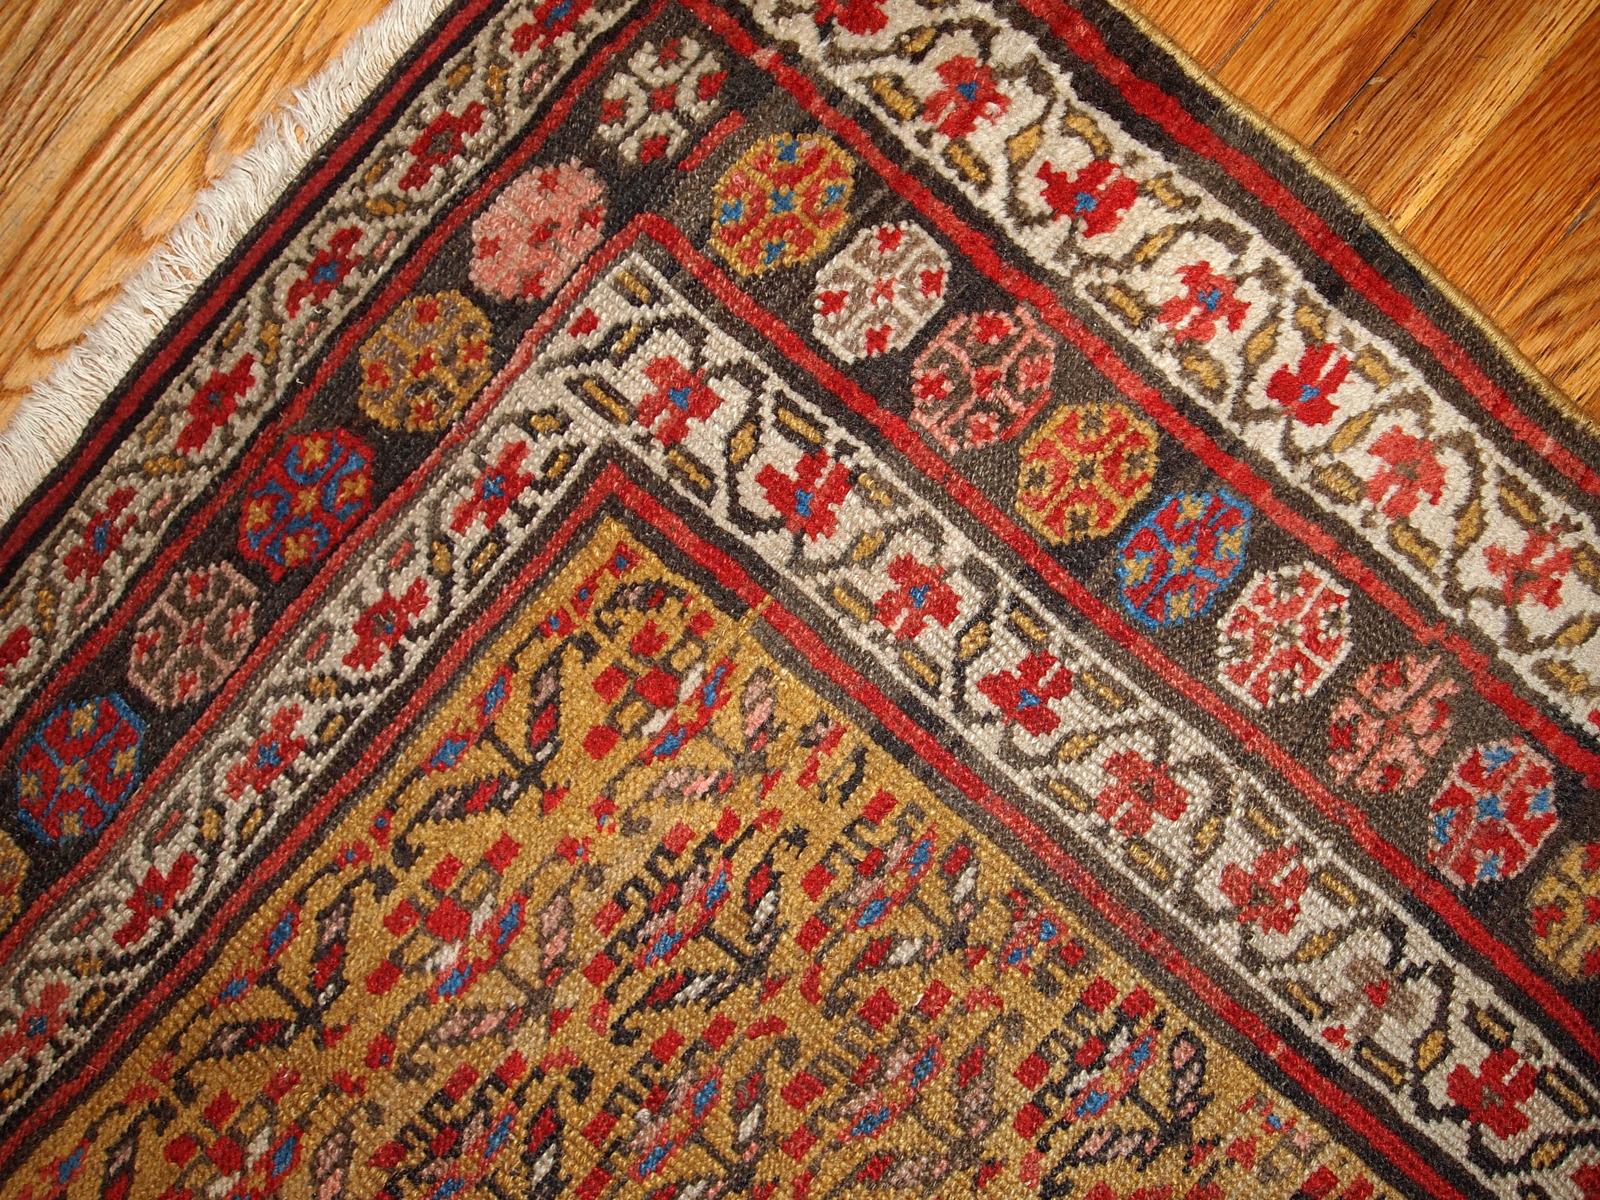 Antique Kurdish style rug in yellow, white and red colors. The rug is from the end of 19th century, in good condition. Measures: 4.1' x 7.7' (125cm x 235cm).